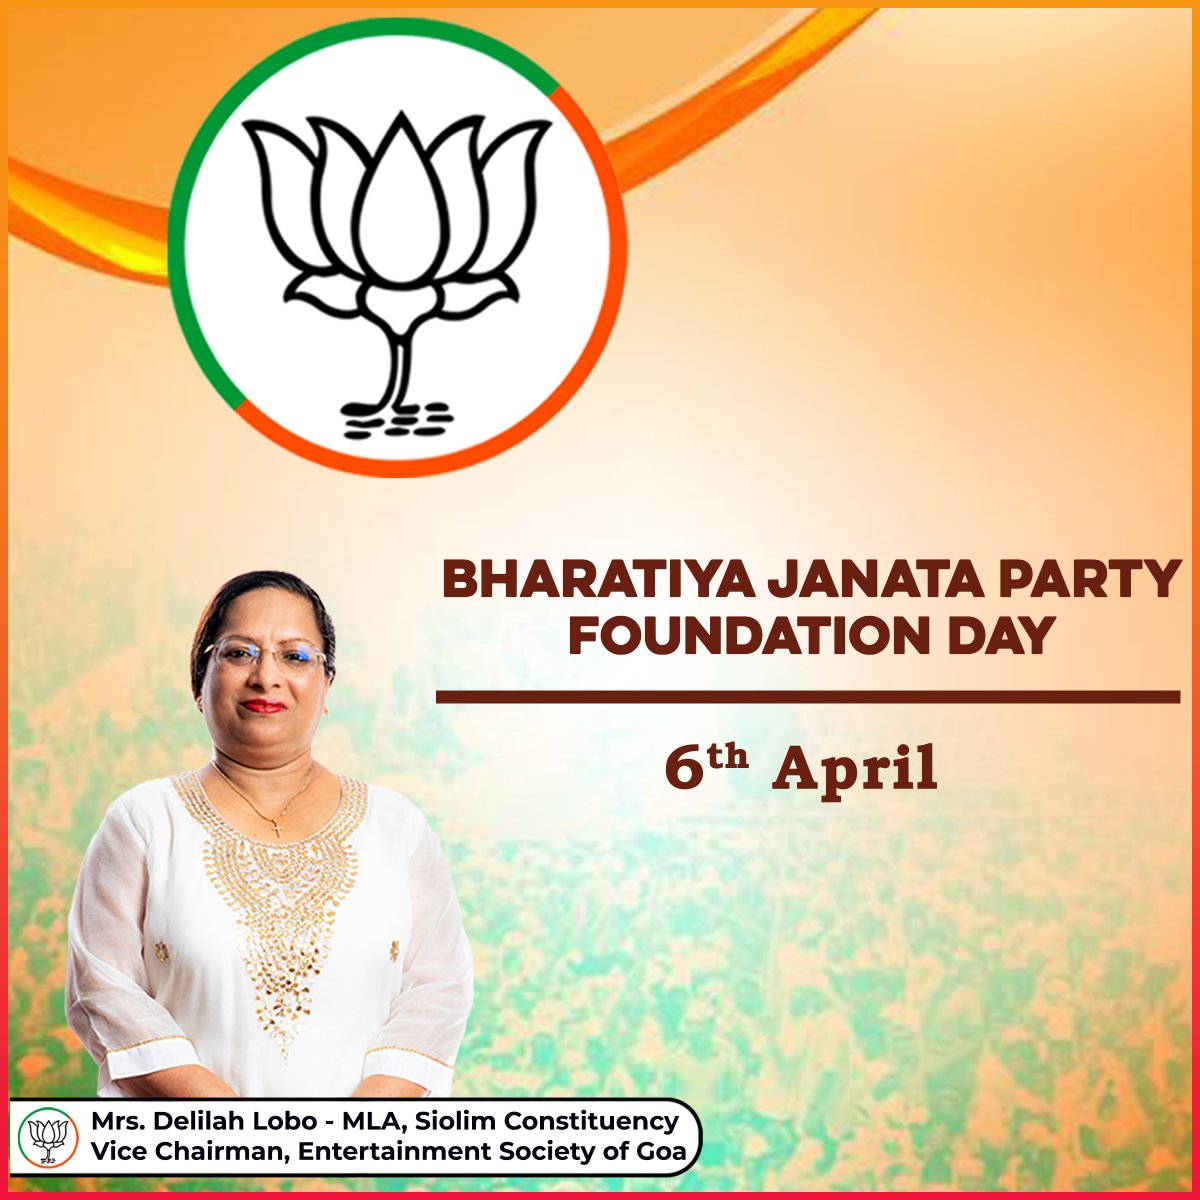 On this #BJPSthapanaDiwas, I pay tribute to the visionary founders of the Bharatiya Janata Party, the world's largest political organization. Sending heartfelt greetings to all dedicated BJP Karyakartas on this momentous day. Let's come together to renew our commitment to